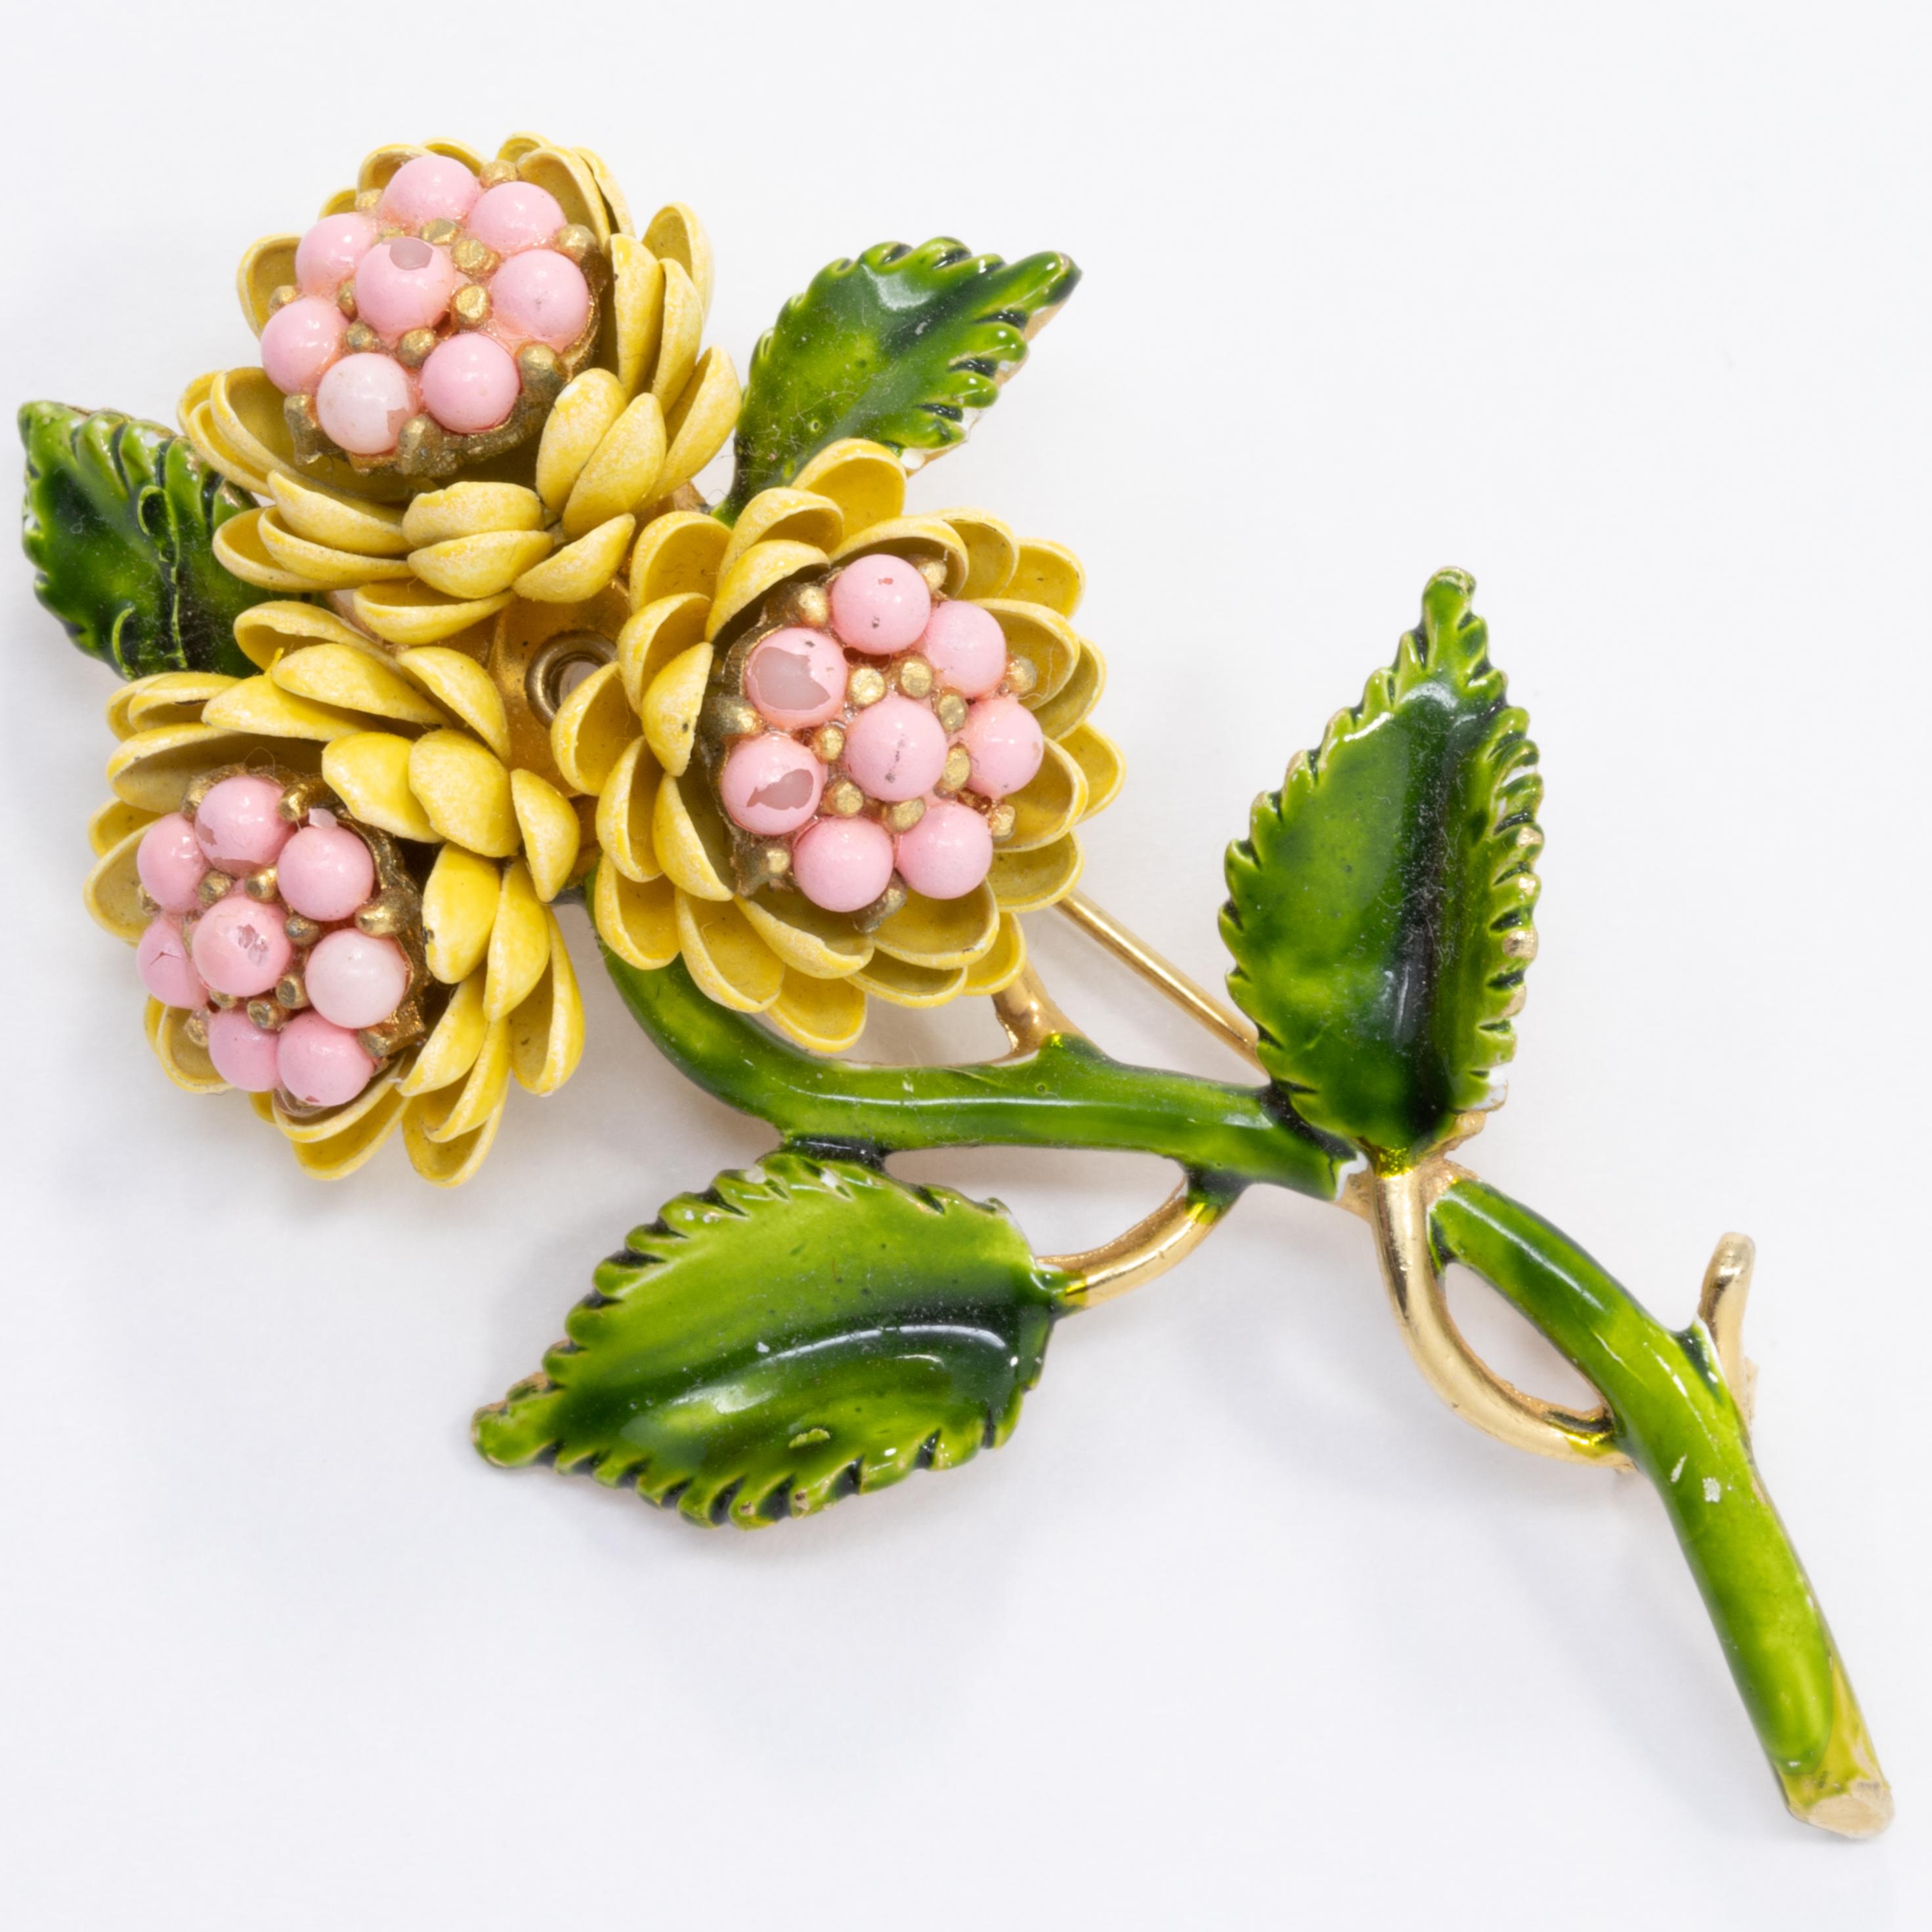 A colorful, matching set of flower clip on earrings and brooch.

Resin painted with green, yellow, and pink enamel. Gold-plated on the back.

Some wear of enamel and plating - please see photos!

